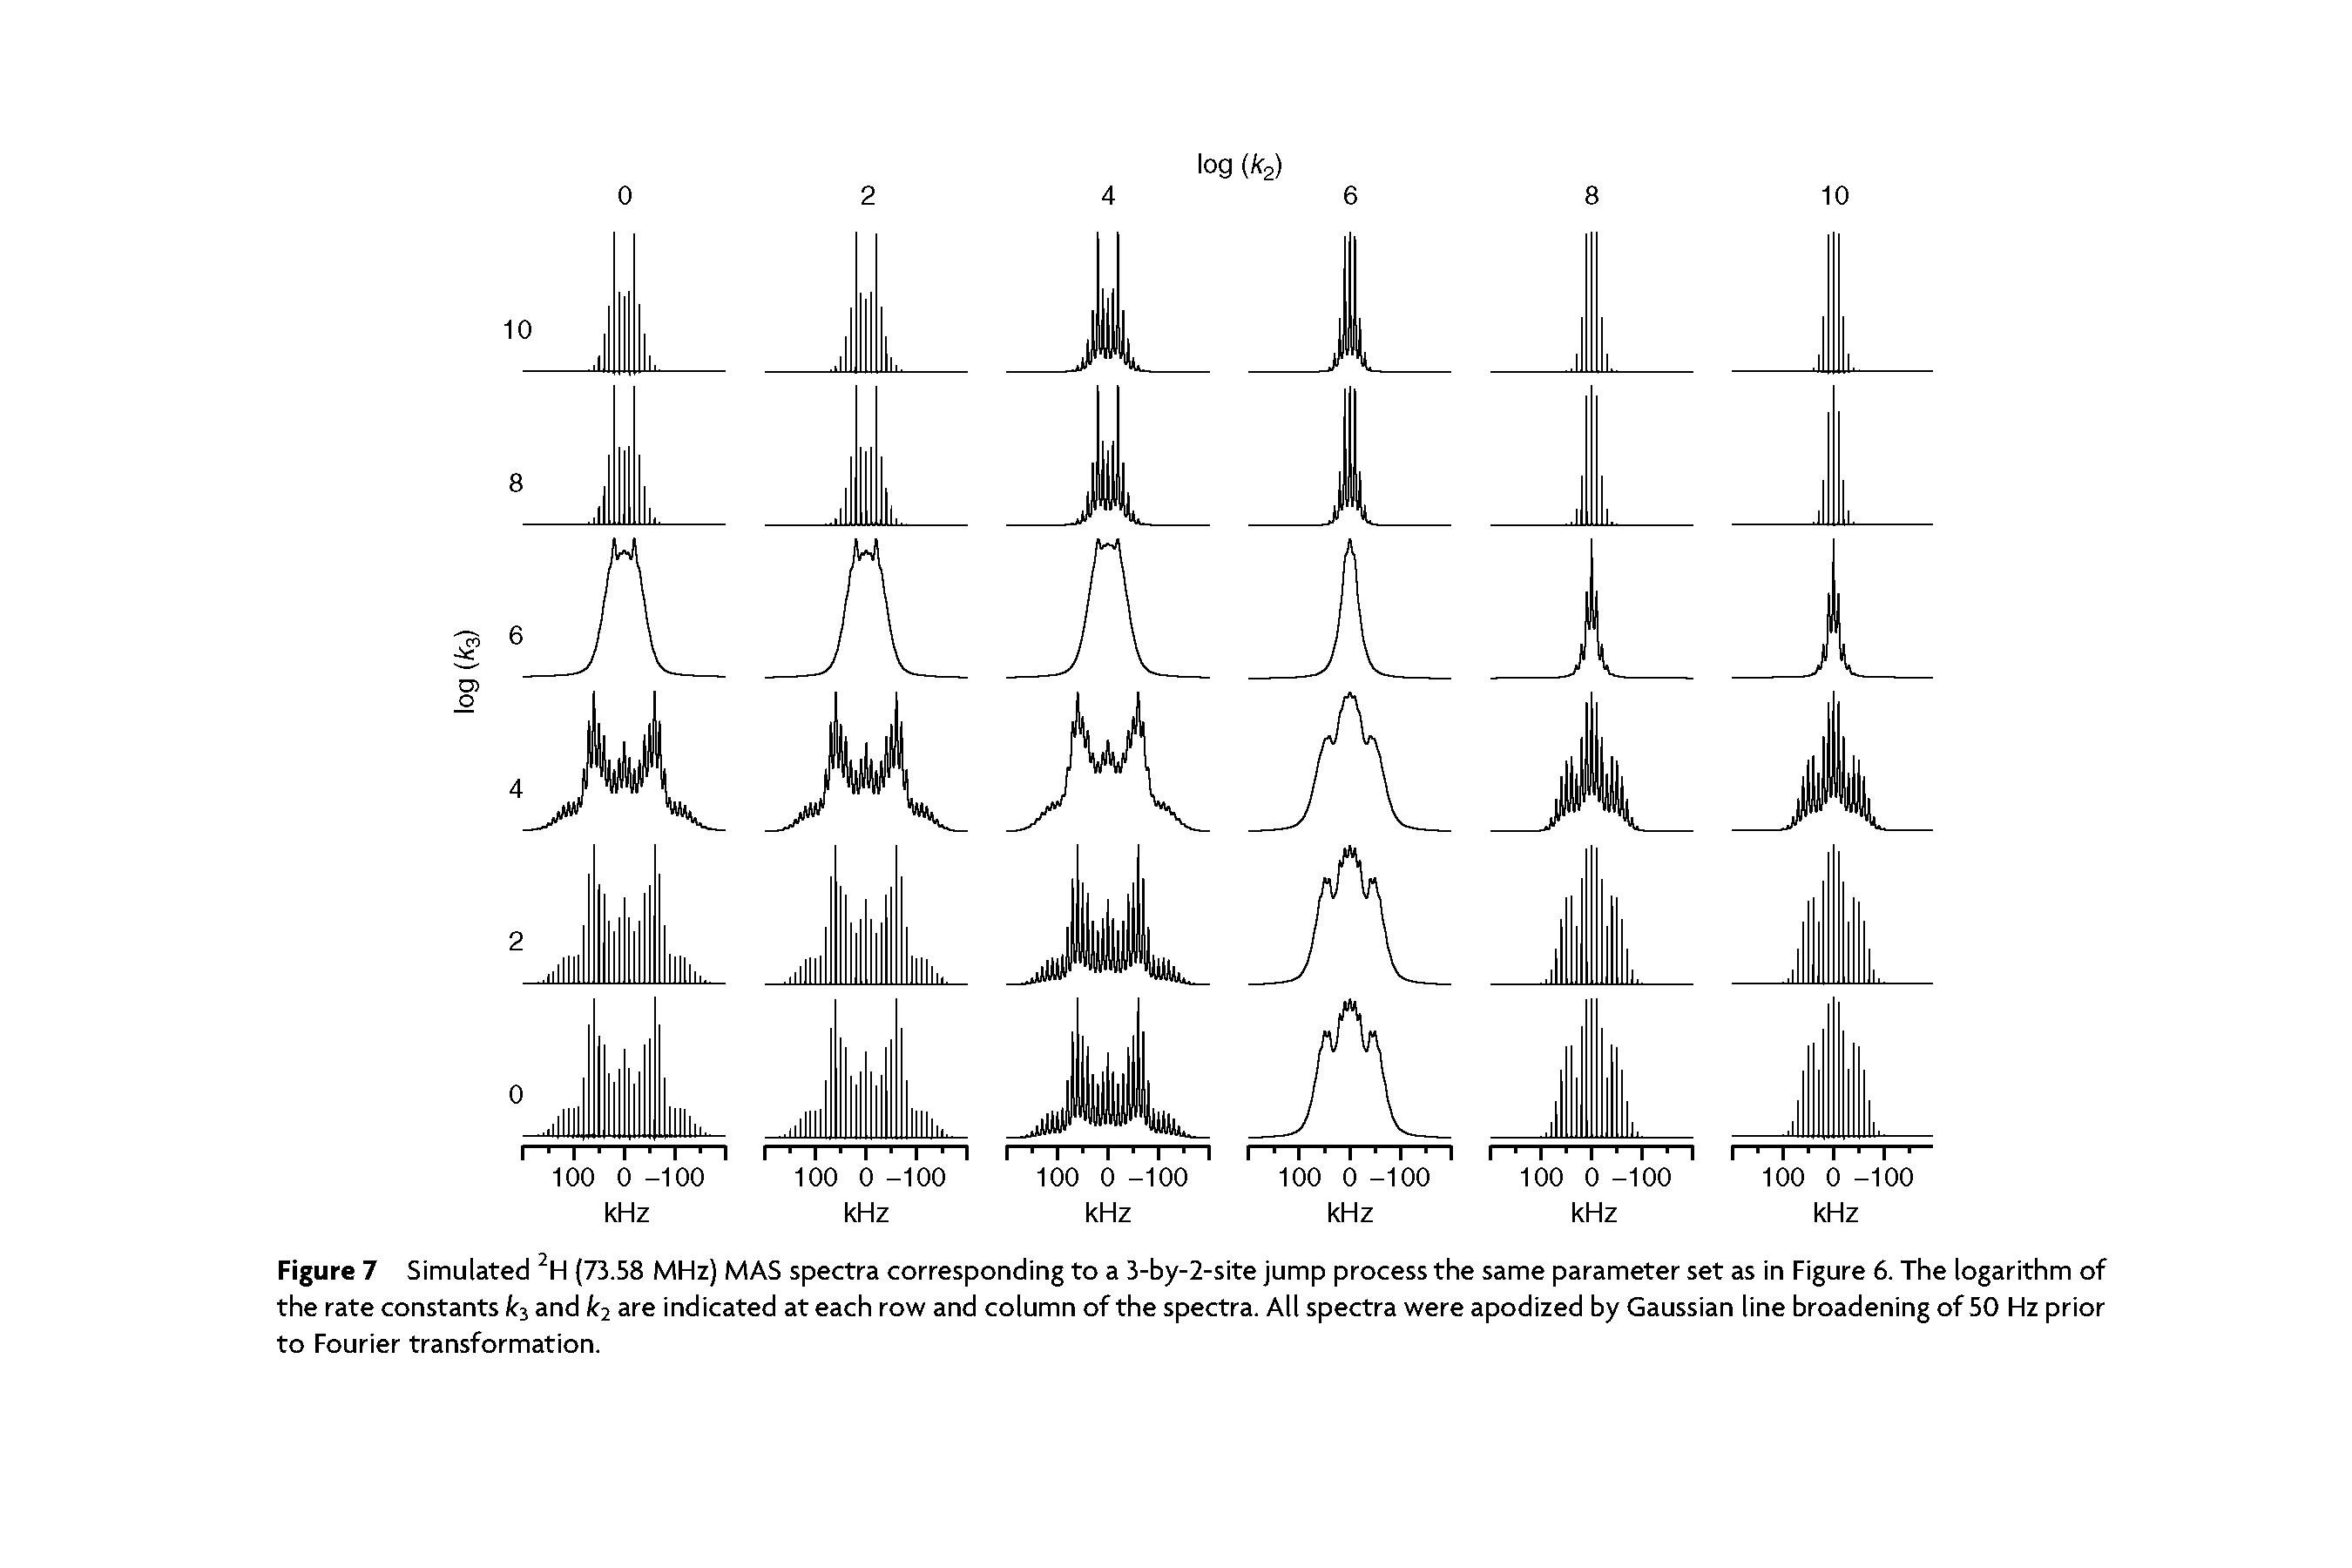 Figure 7 Simulated 2H (73.58 MHz) MAS spectra corresponding to a 3-by-2-site jump process the same parameter set as in Figure 6. The logarithm of the rate constants and k2 are indicated at each row and column of the spectra. All spectra were apodized by Gaussian line broadening of 50 Hz prior to Fourier transformation.